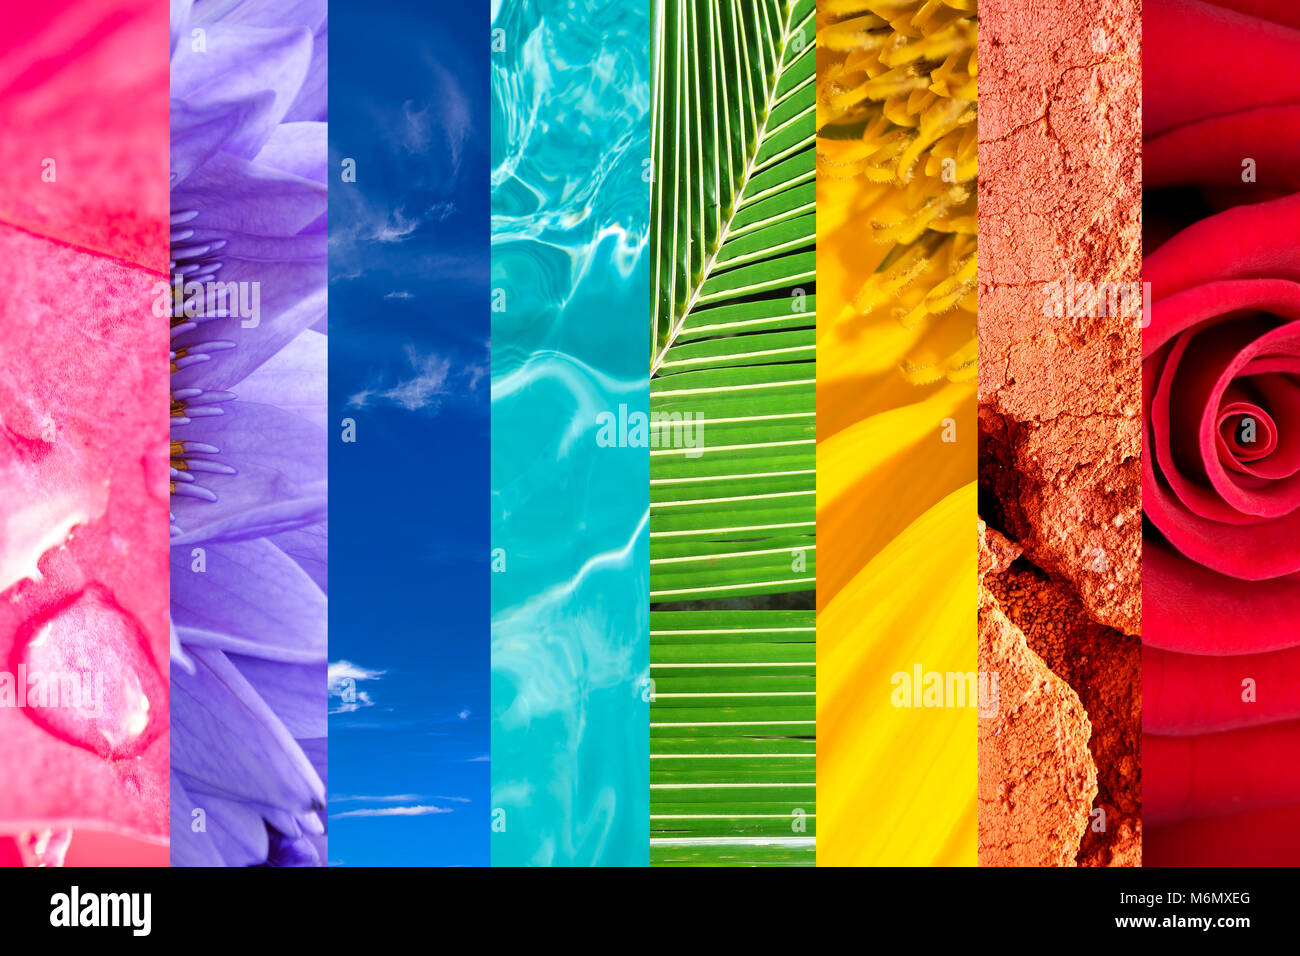 Rainbow of nature, colorful nature photo collage, vivid colors of nature Stock Photo